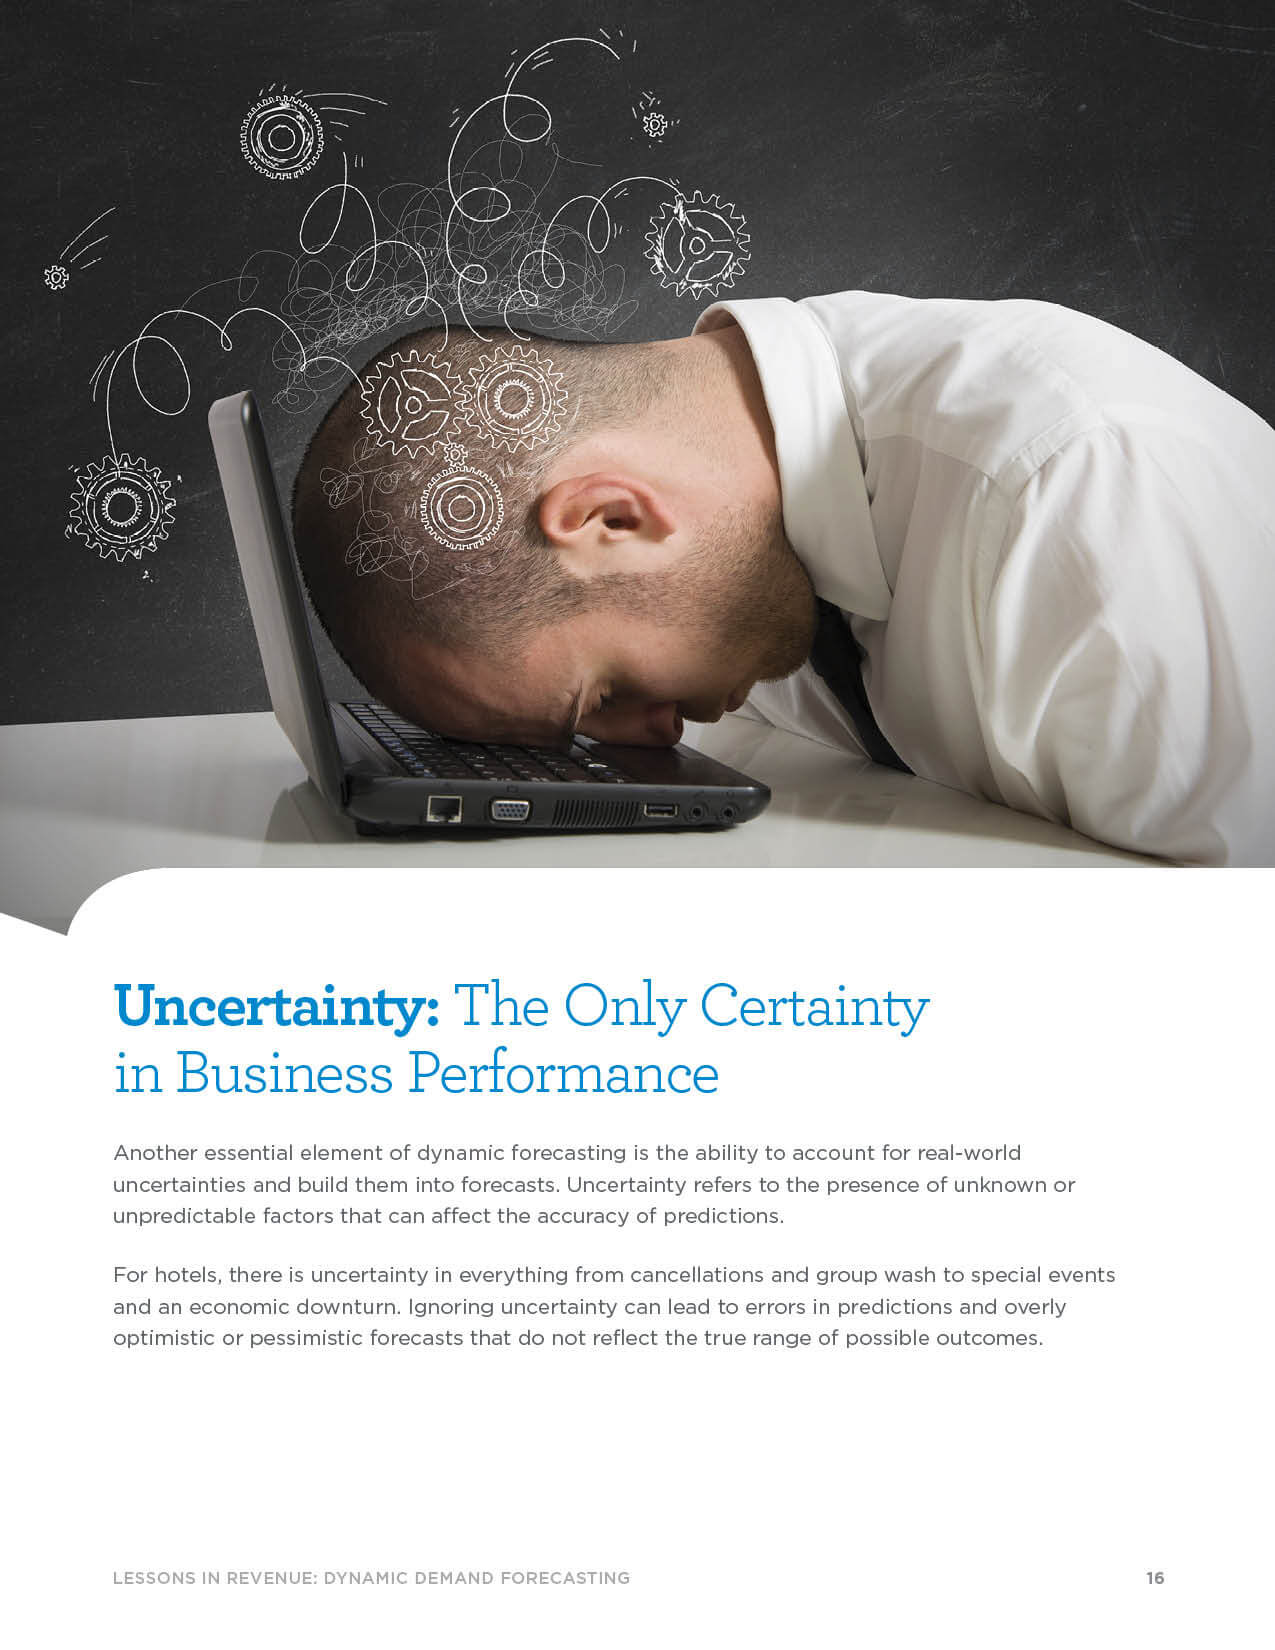 Page 16 - Uncertainty: The Only Certainty in Hotel Performance